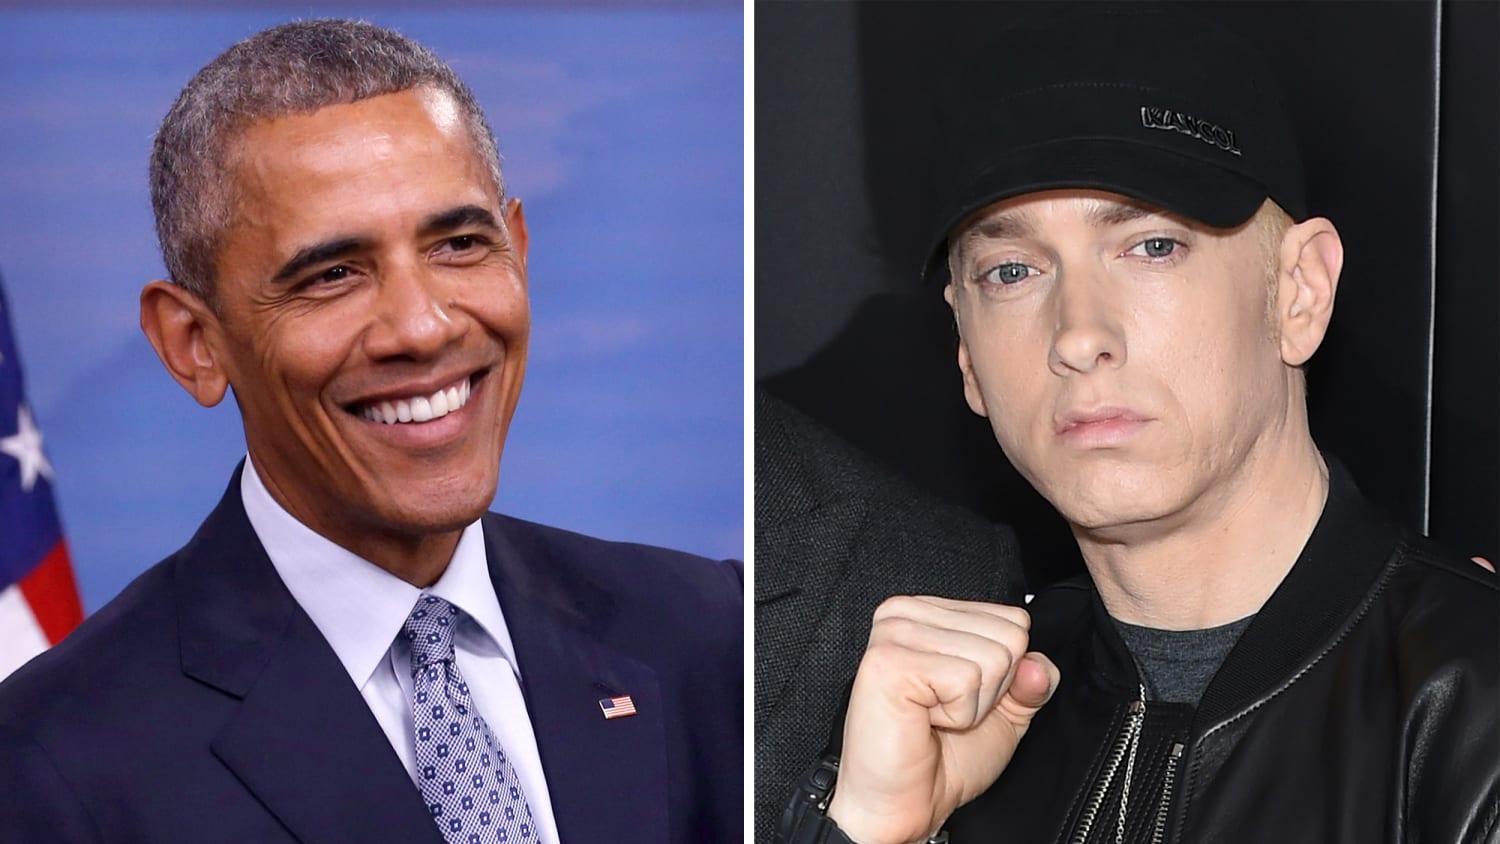 President Obama got pumped for his DNC speech with Eminem's 'Lose Yourself' - TODAY.com2500 x 1407